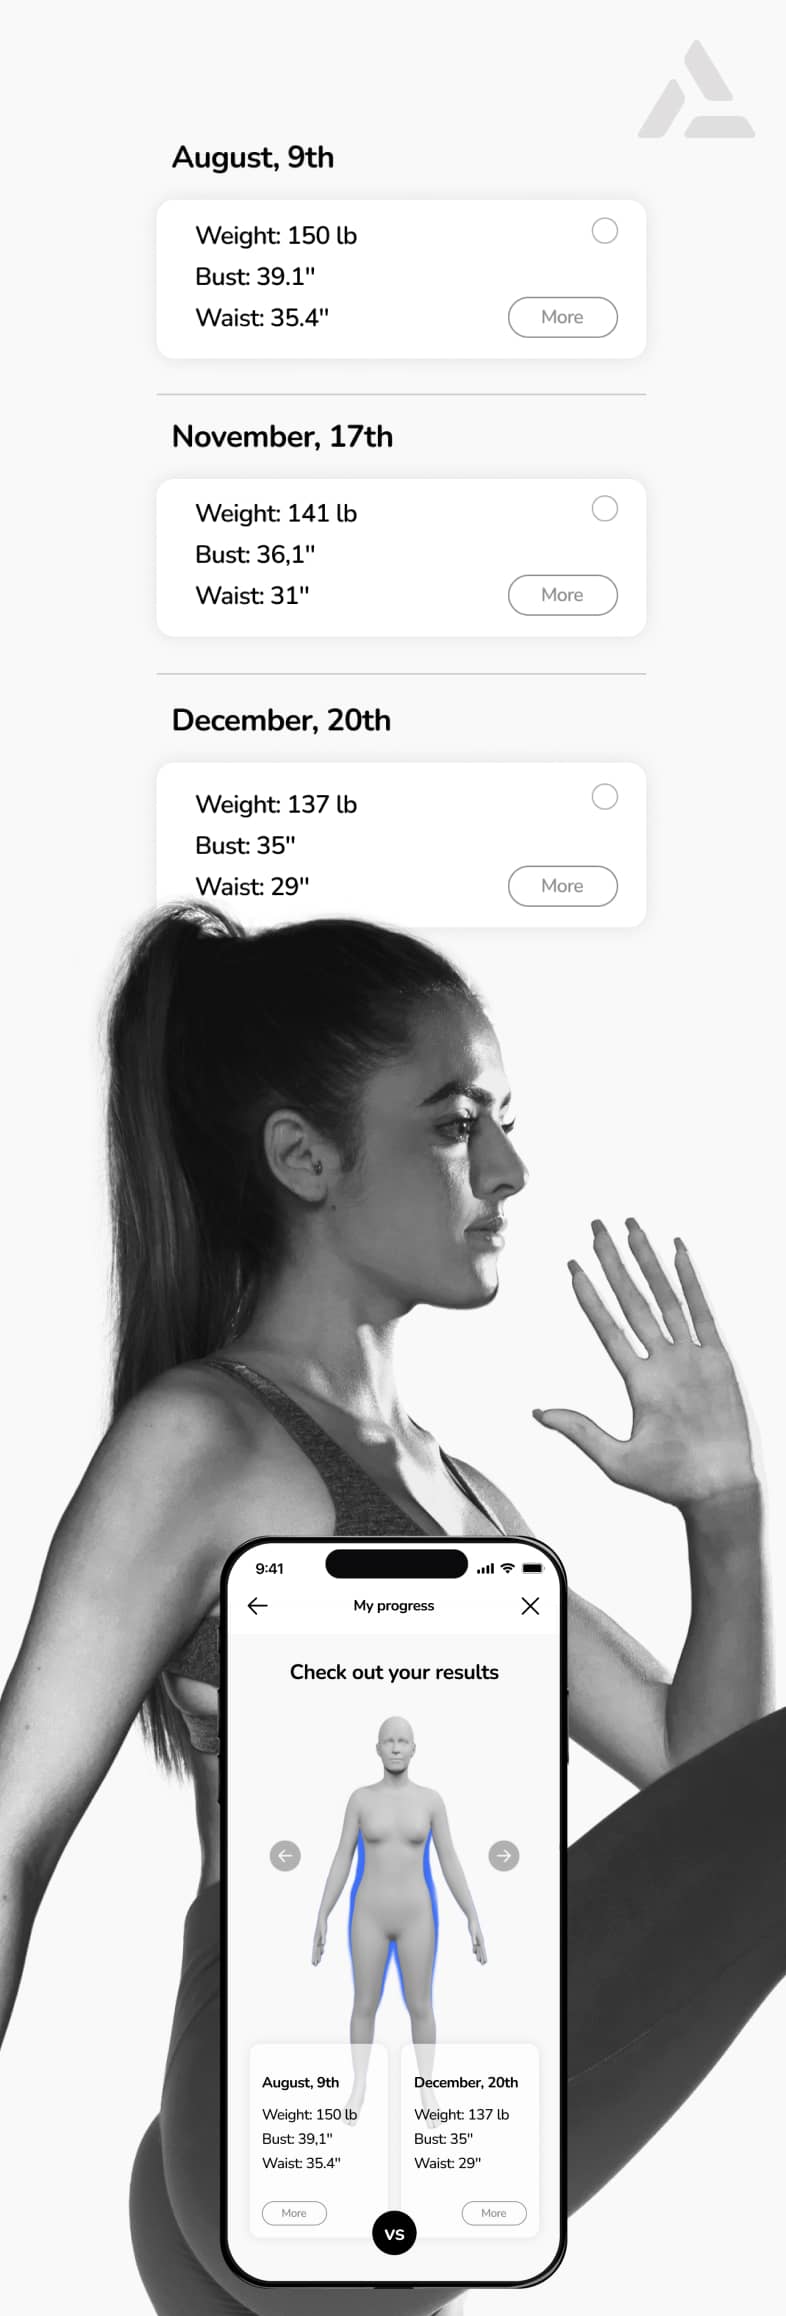 Side profile of a woman holding a smartphone displaying her fitness progress, with an AI-powered body scanning avatar and body measurements.